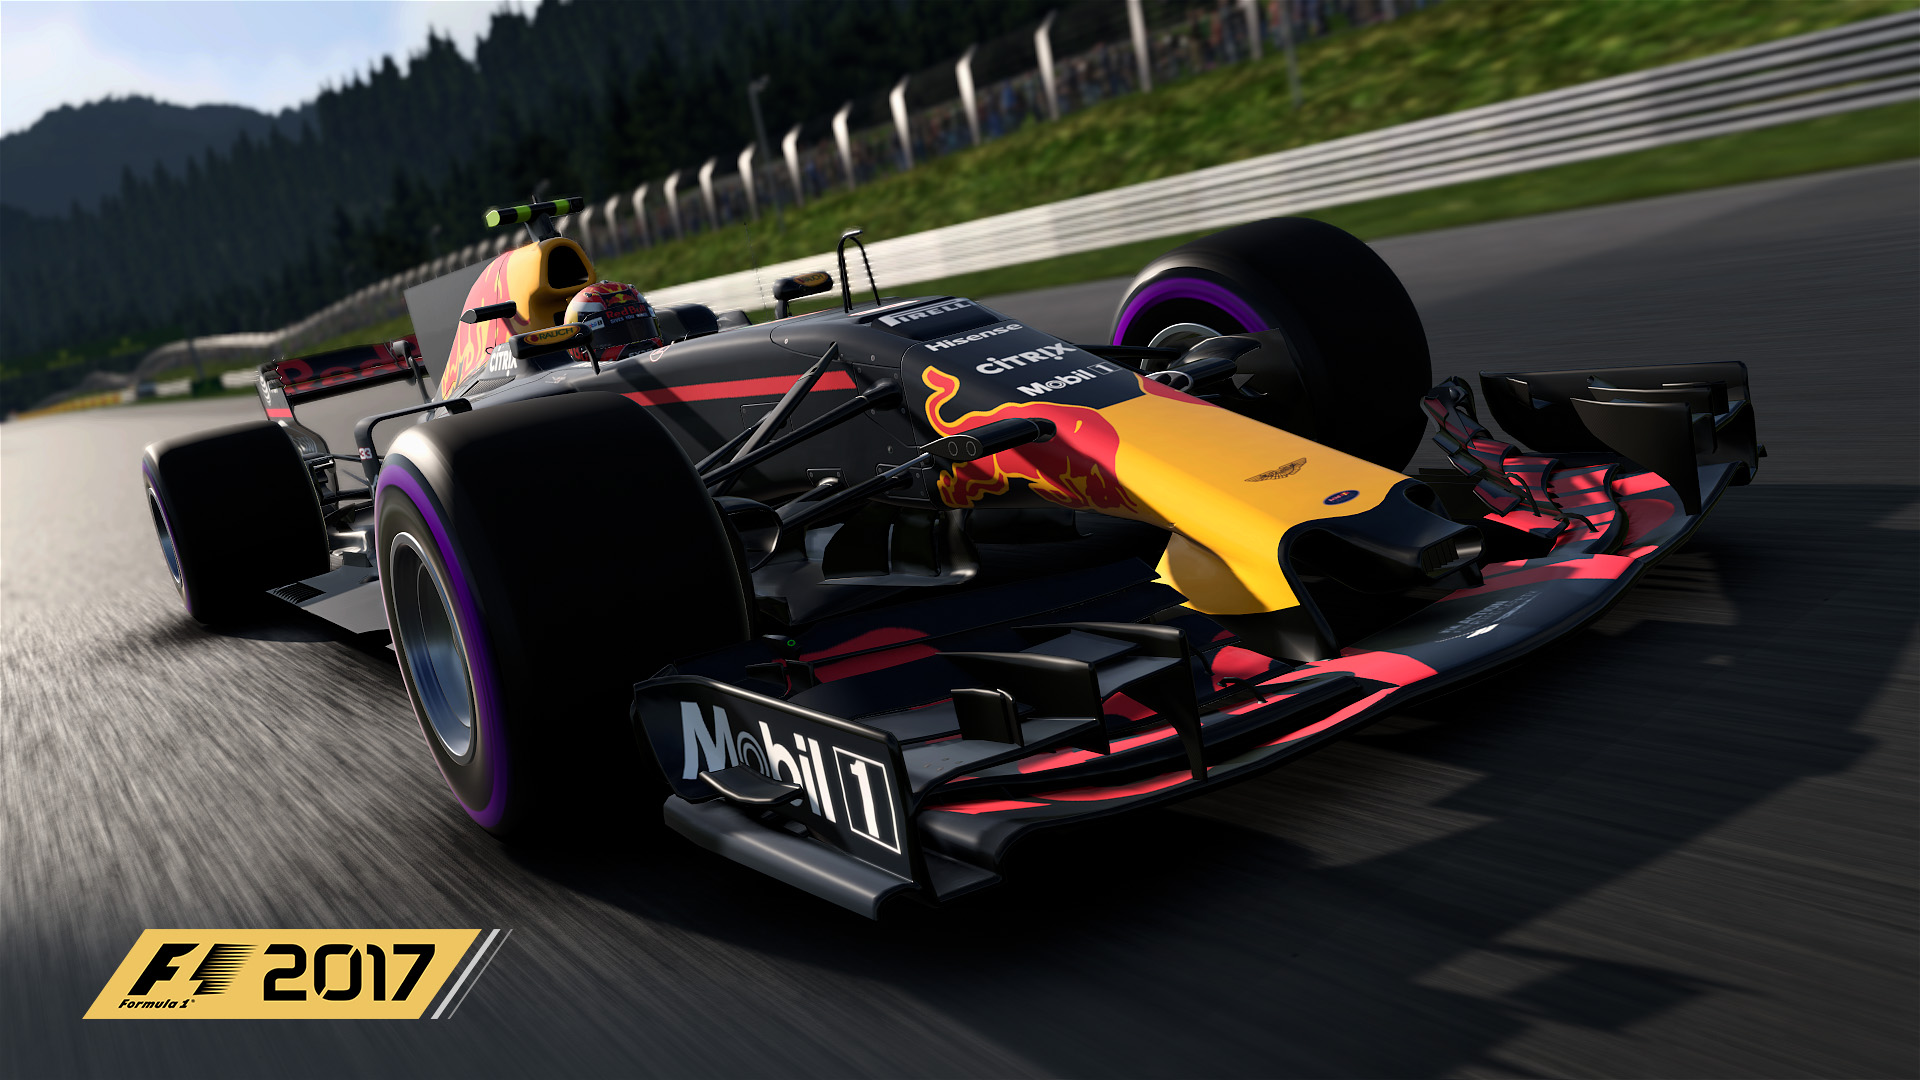 F1 2017 - New official screenshots released